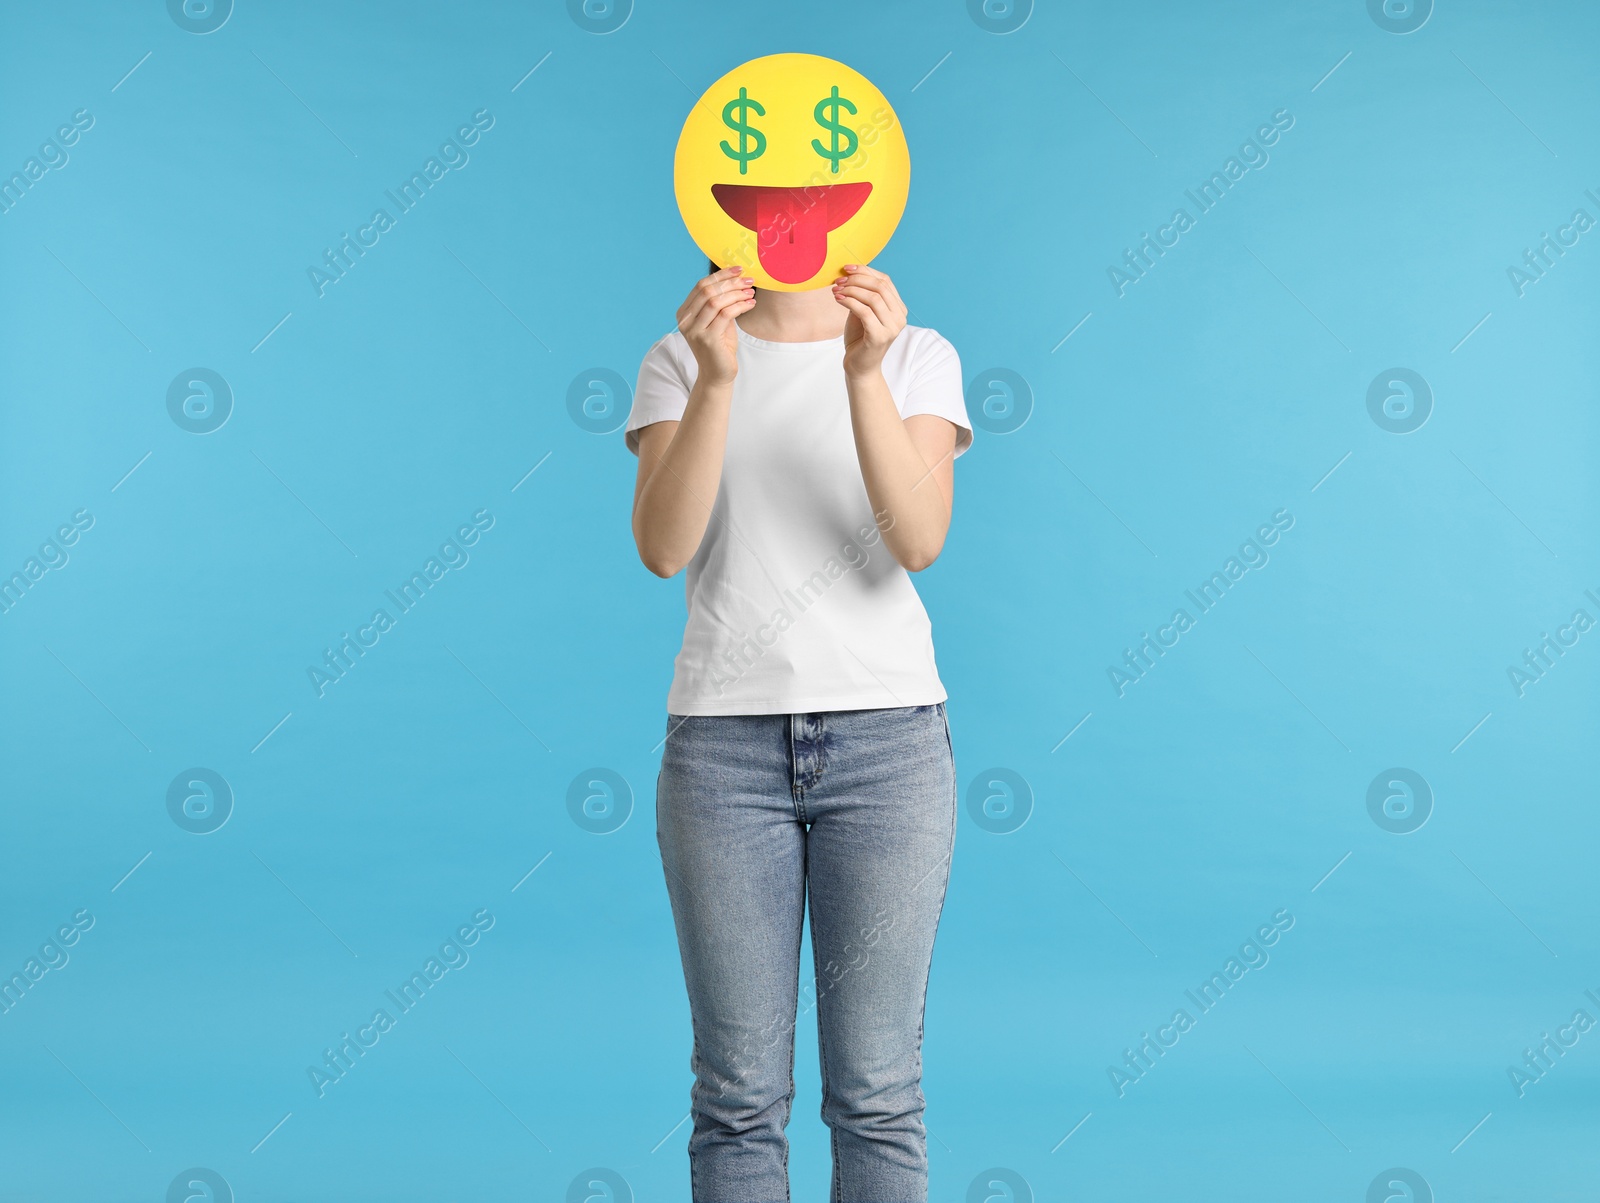 Photo of Woman covering face with dollar signs instead of eyes on light blue background